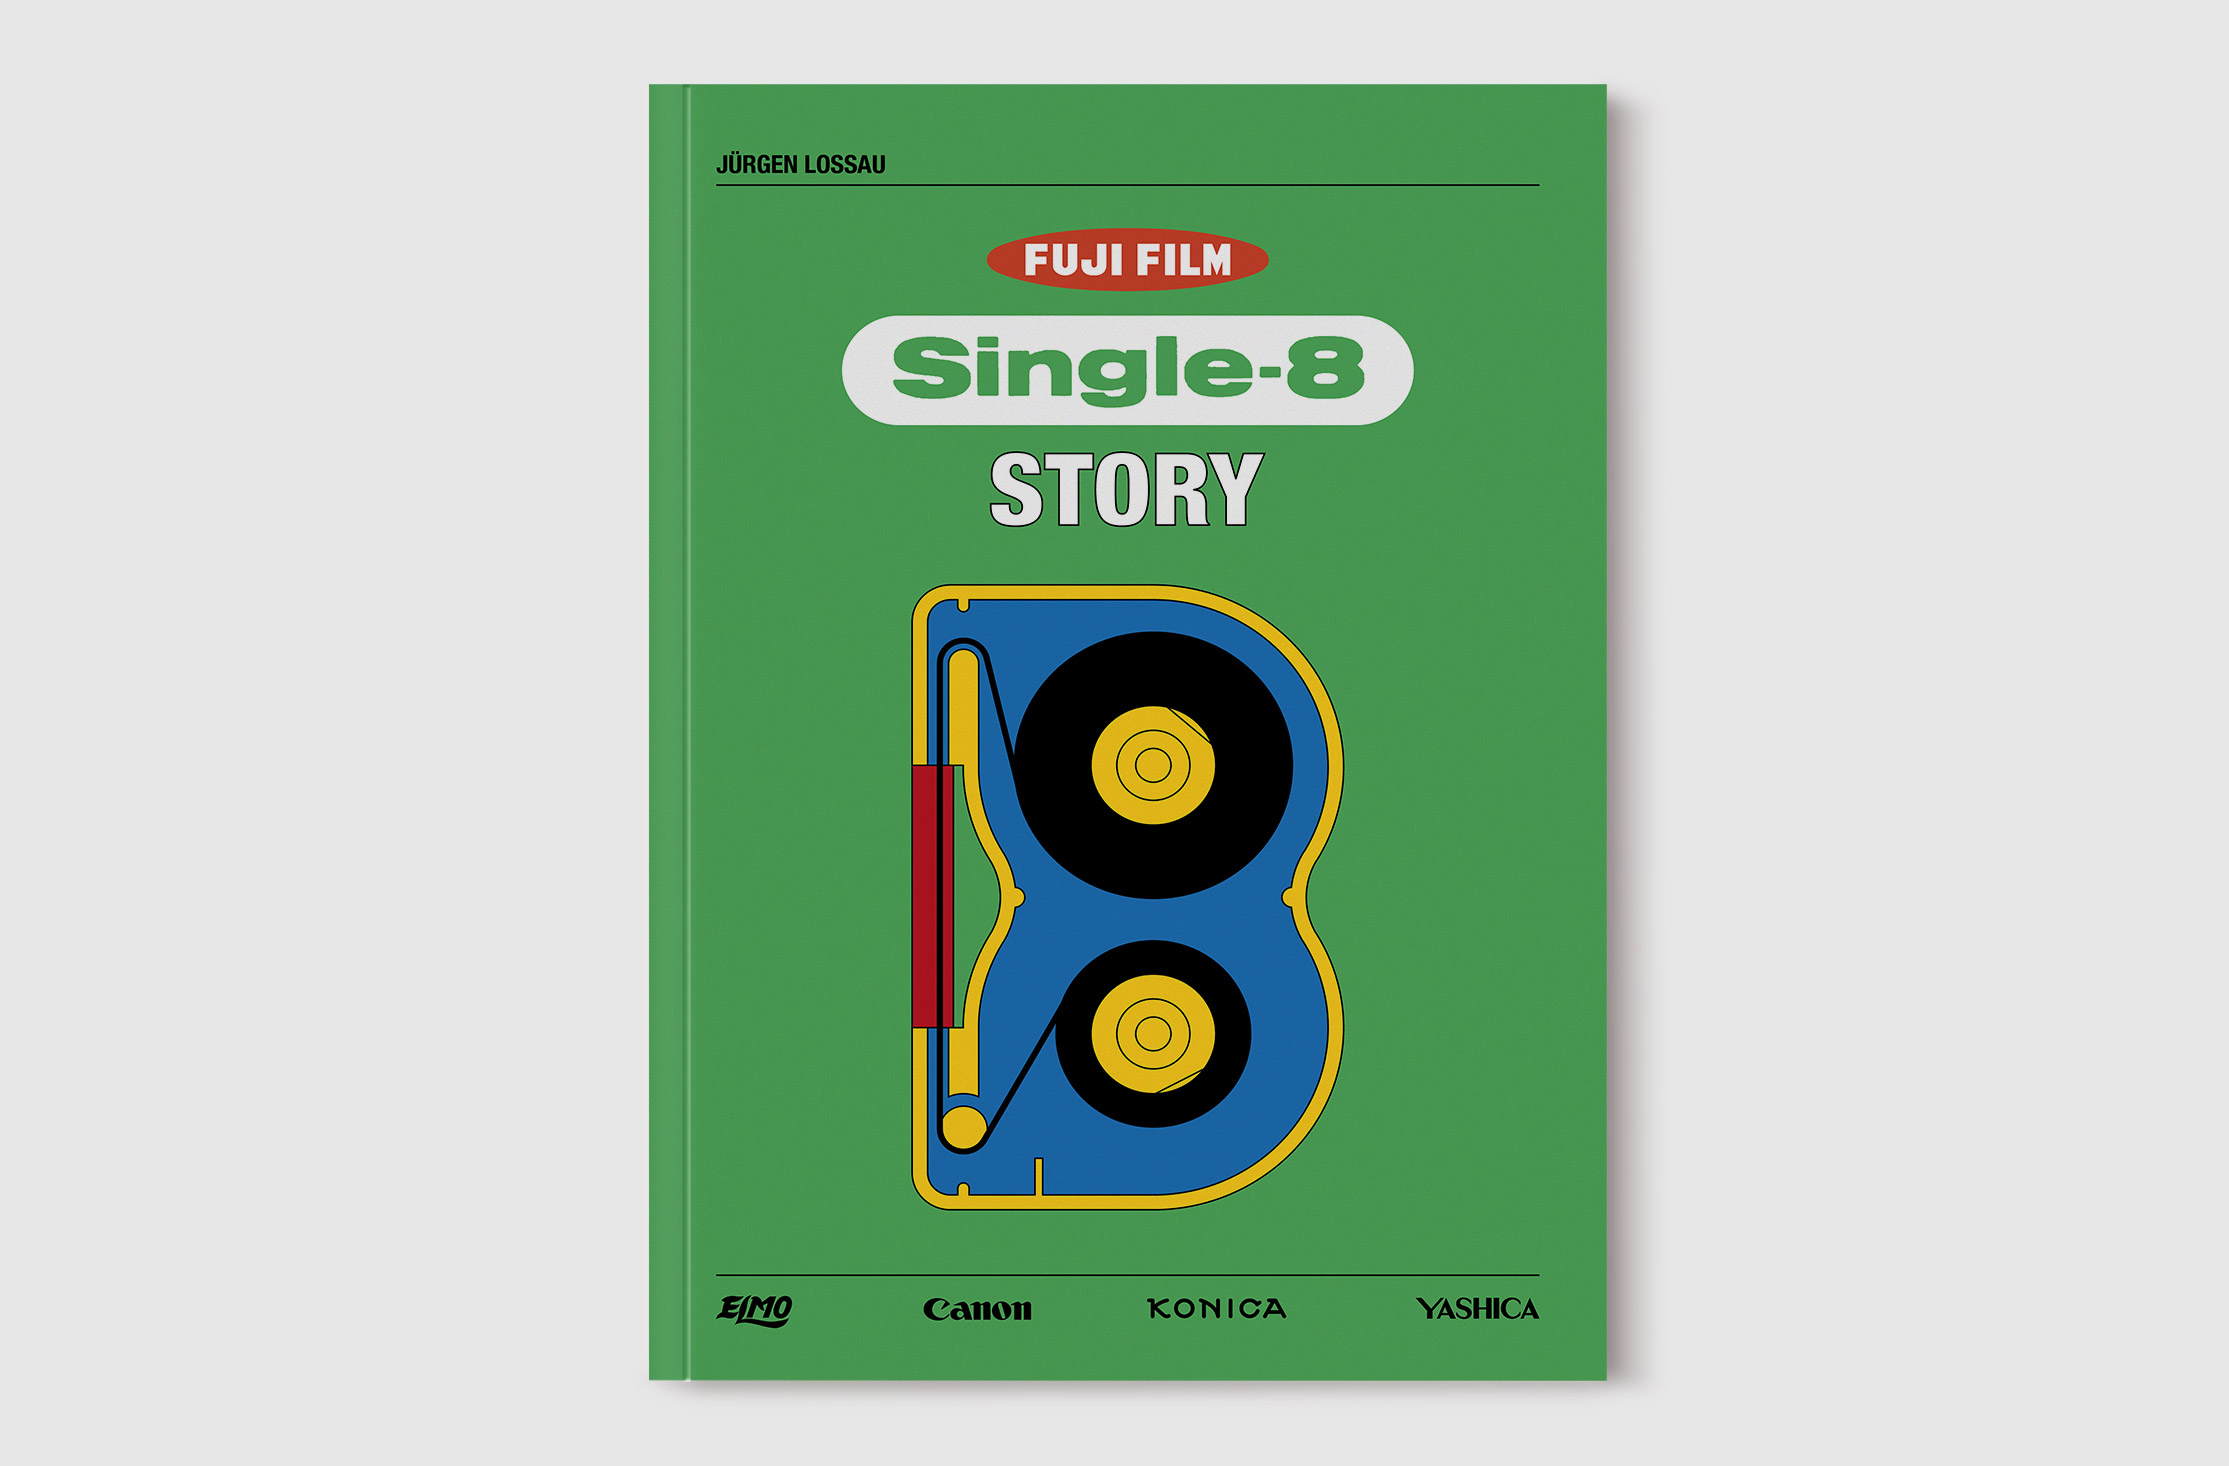 A new book: The Single 8 Story